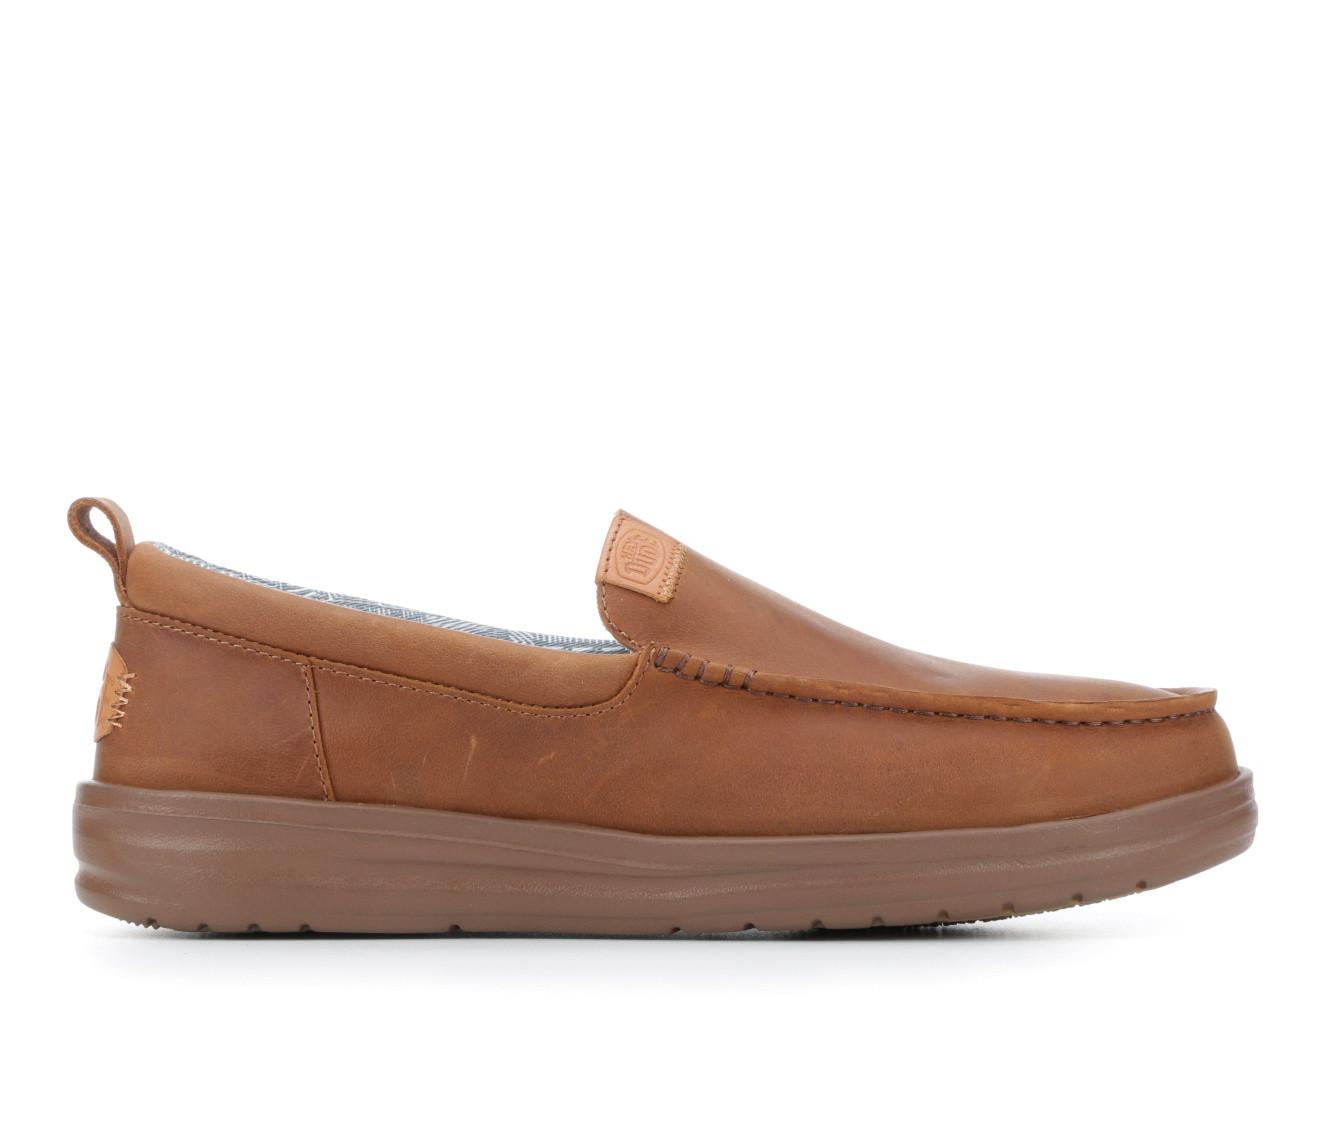 Men's HEYDUDE Wally Grip Leather Slip-On Casual Shoes